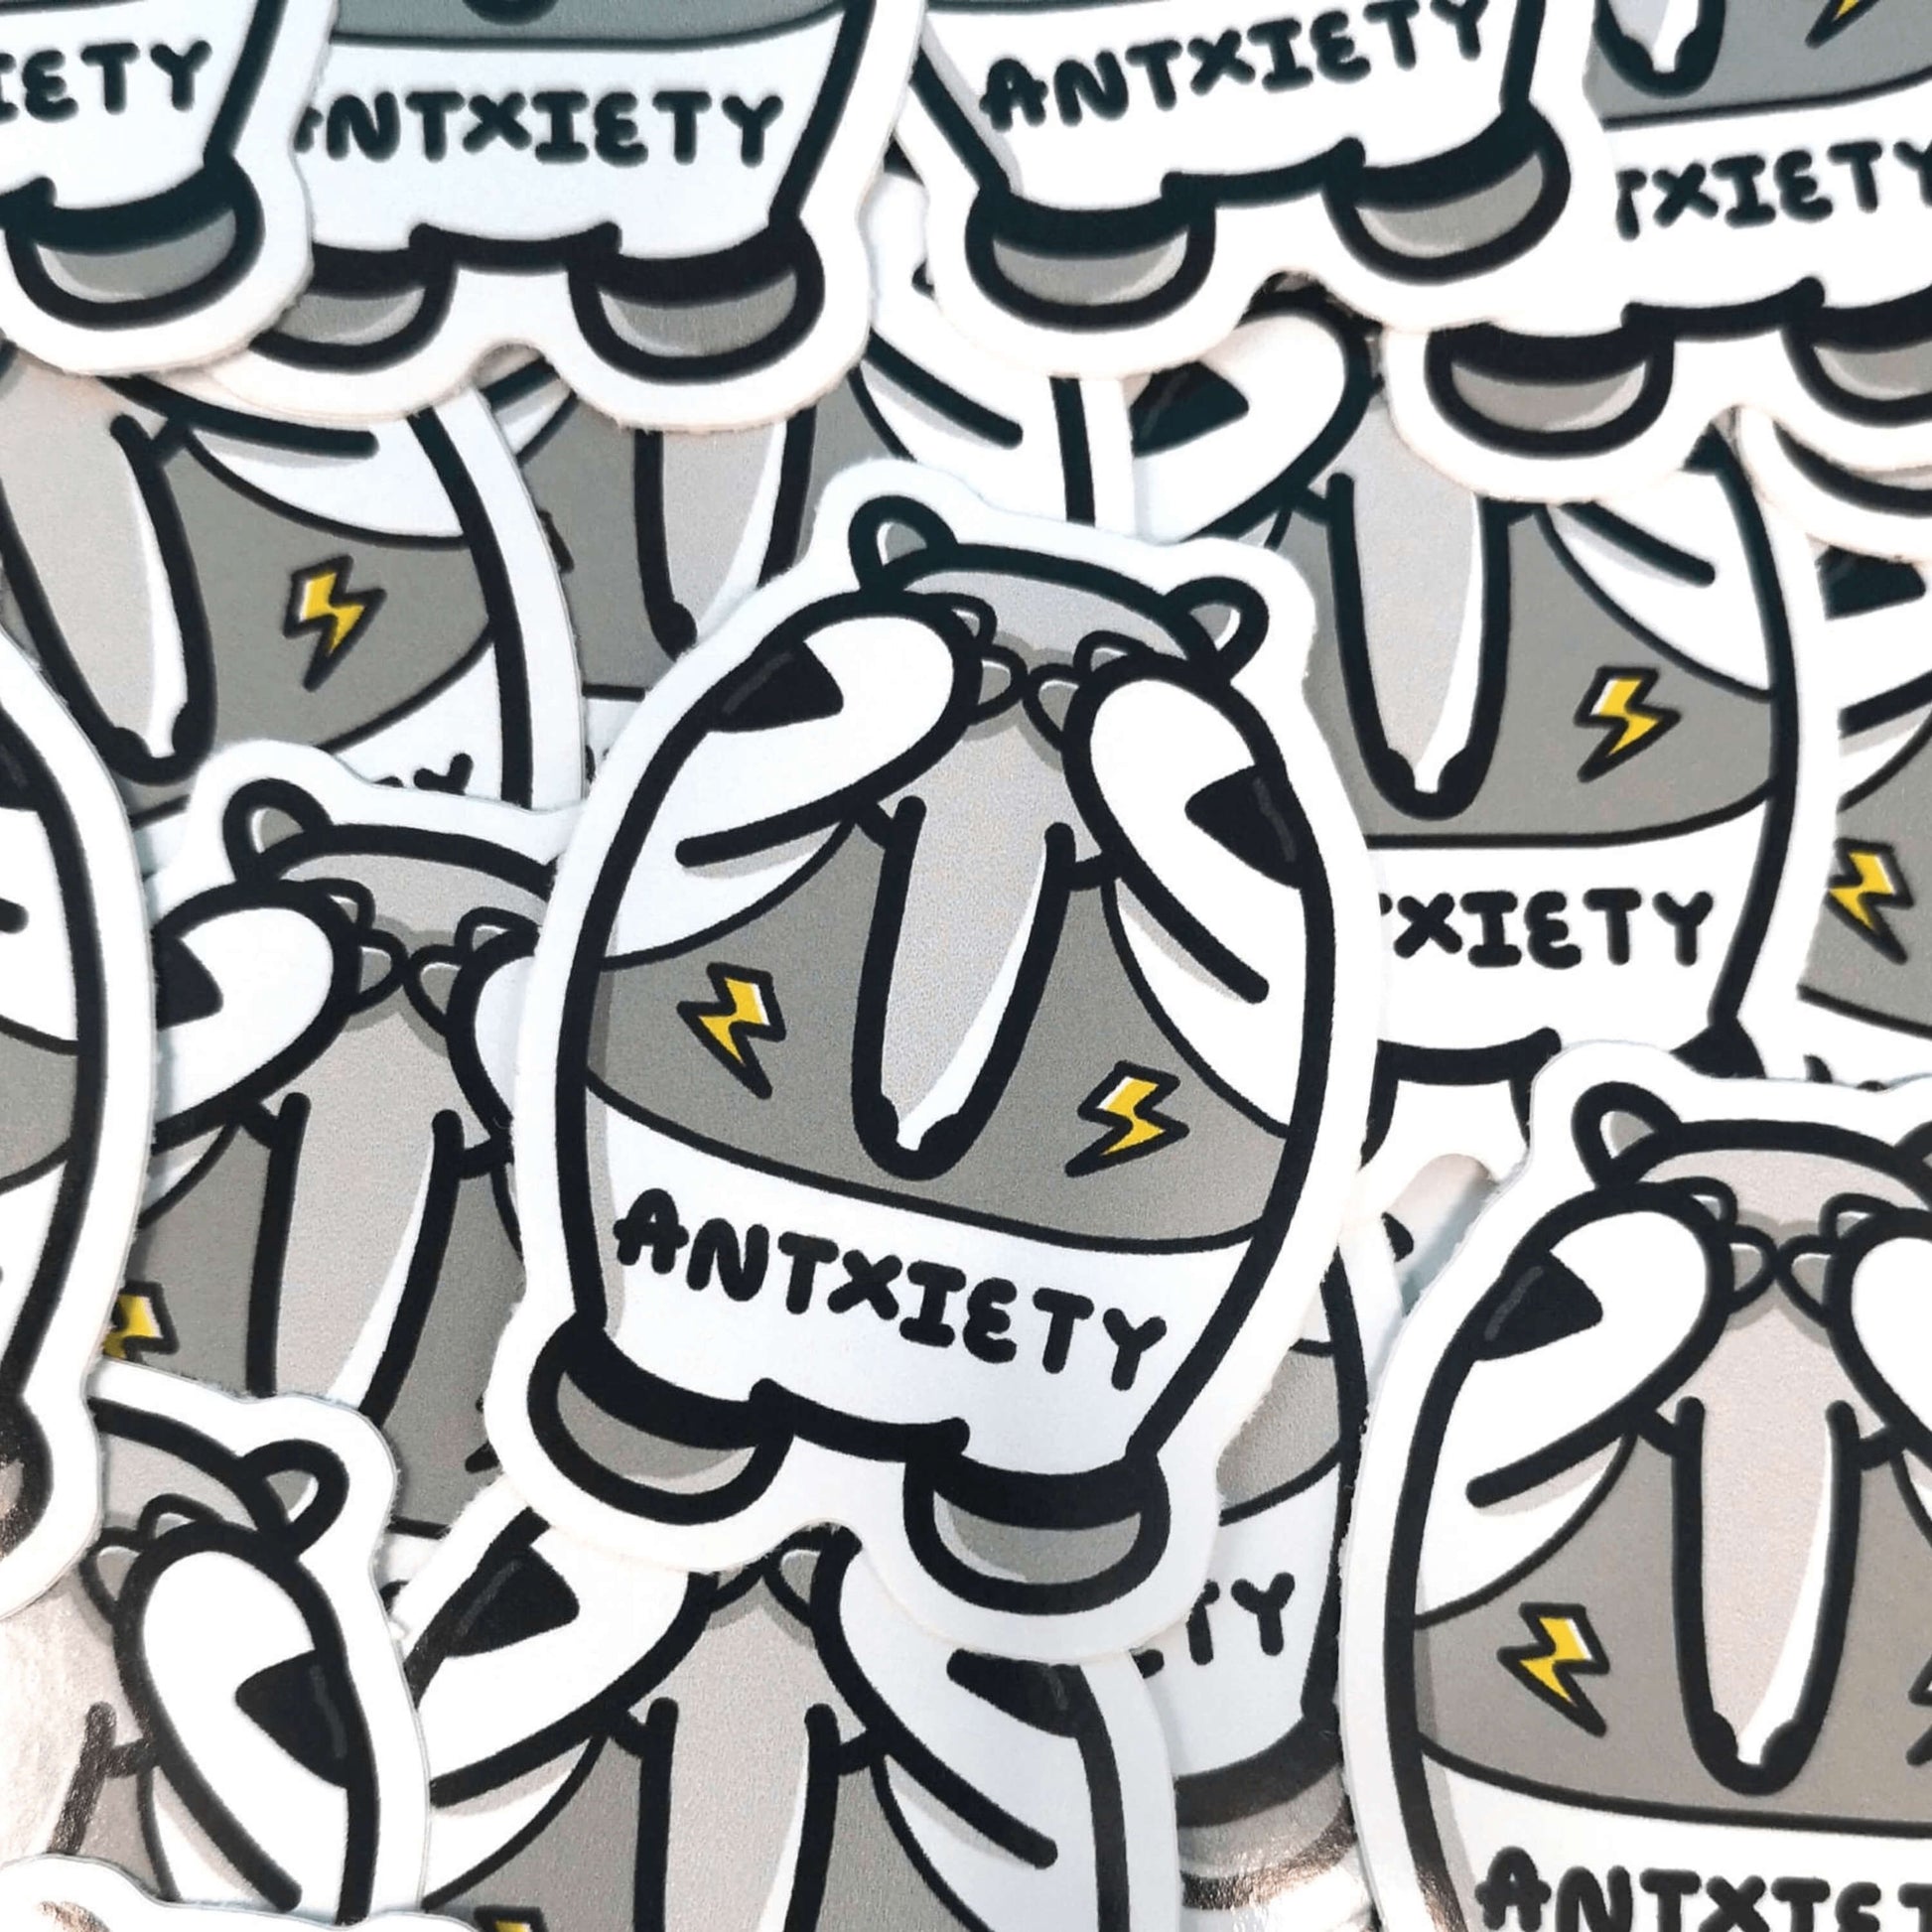 Antxiety Sticker - Anxiety sat on lots of the stickers. The sticker is a grey and white anteater with yellow lightning bolts and the word antxiety across its belly. The sticker is designed to raise awareness for anxiety disorders and anxious emotions.